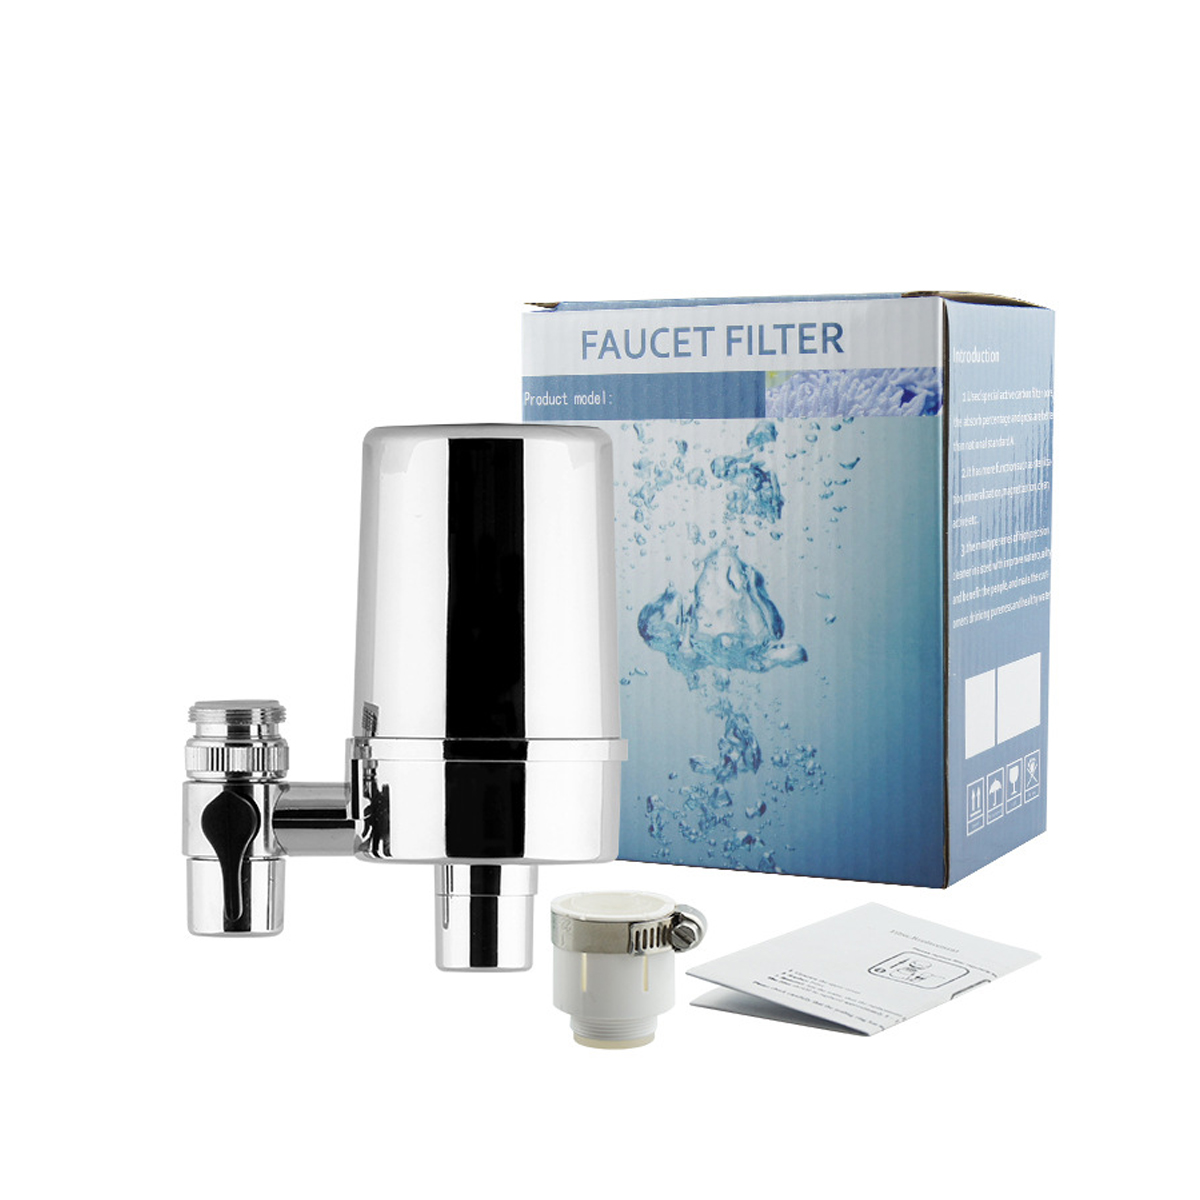 

4 Layers Filtration Faucet Water Filter For Kitchen Bathroom Mount Tap Purifier